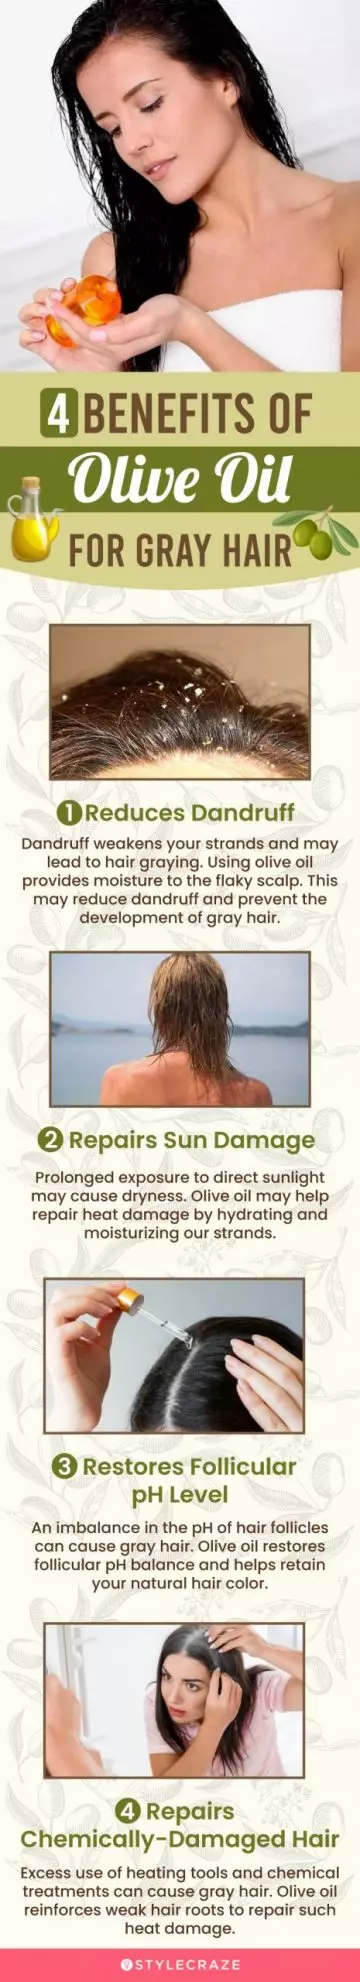 5 benefits of olive oil for gray hair (infographic)